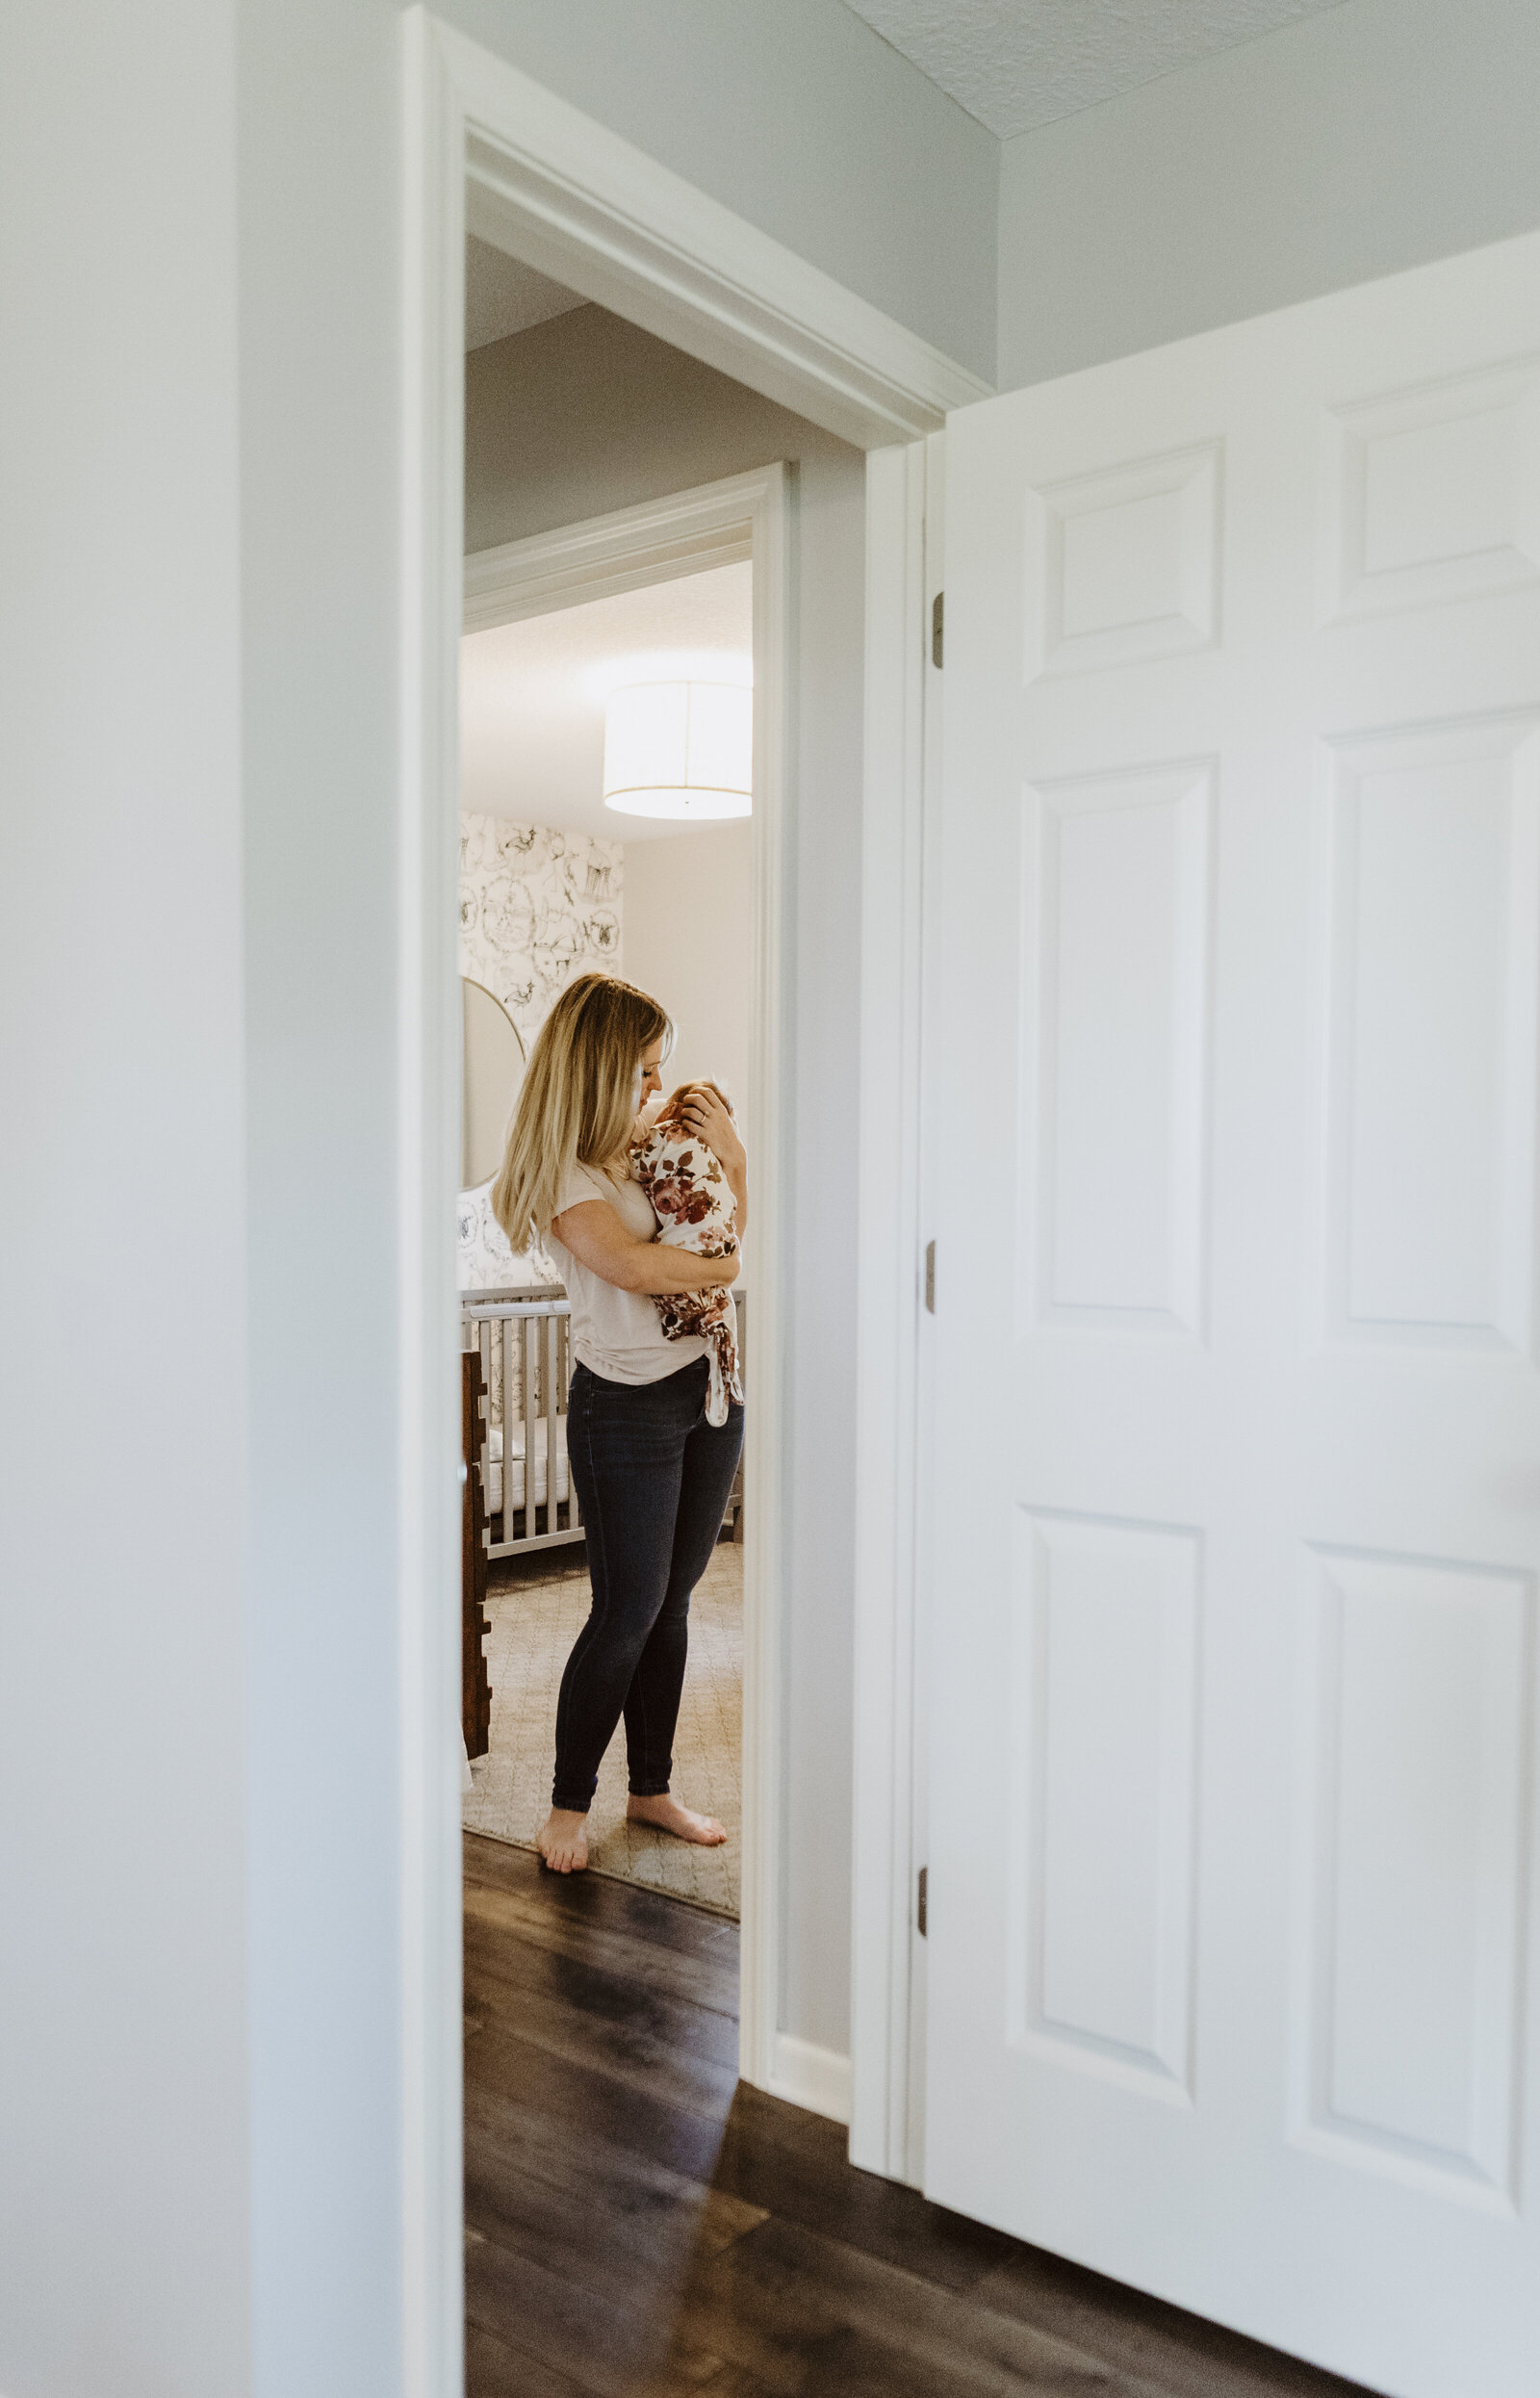 Start with comfortable beginnings in the Twin Cities. Shannon Kathleen Photography creates an atmosphere of bliss for newborns in St. Paul or Minneapolis homes. Book today